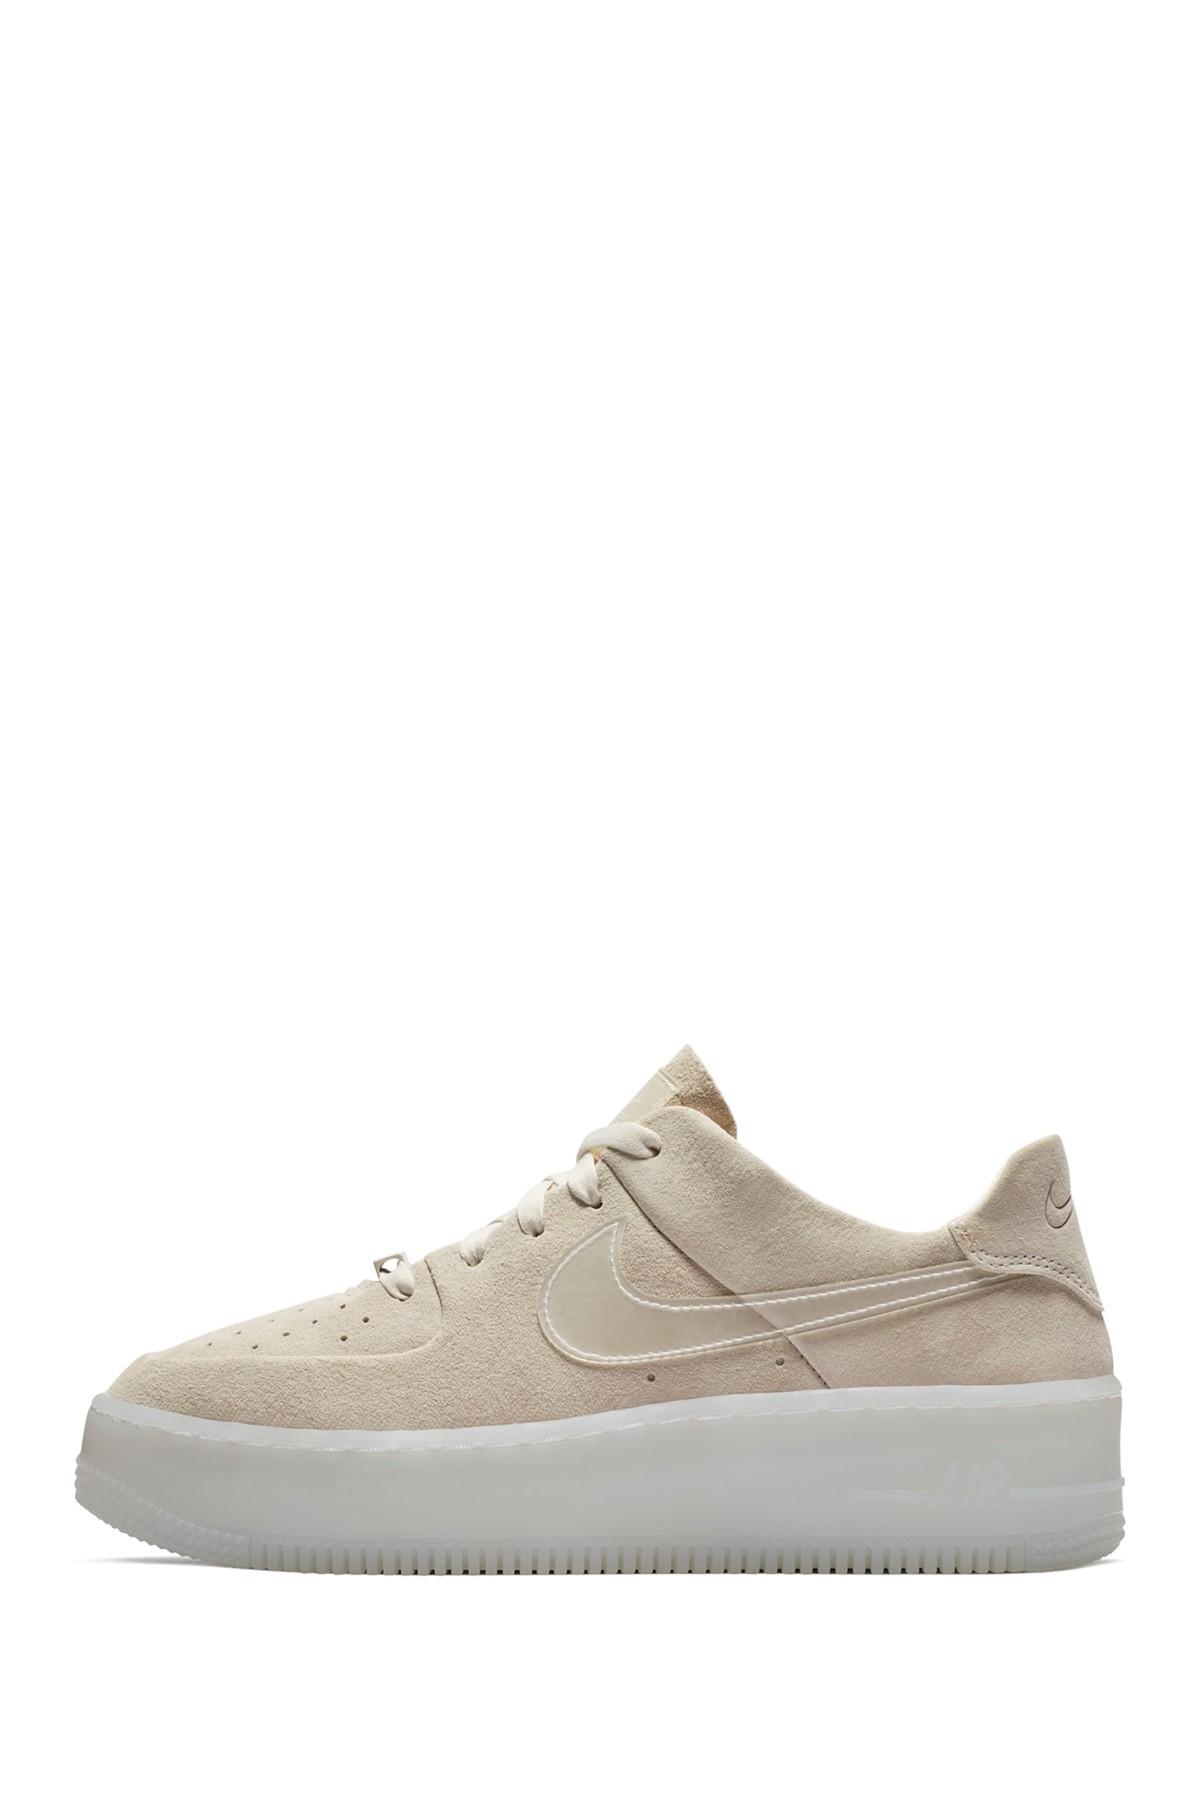 Nike Air Force 1 Sage Low Lx Sneaker in White | Lyst